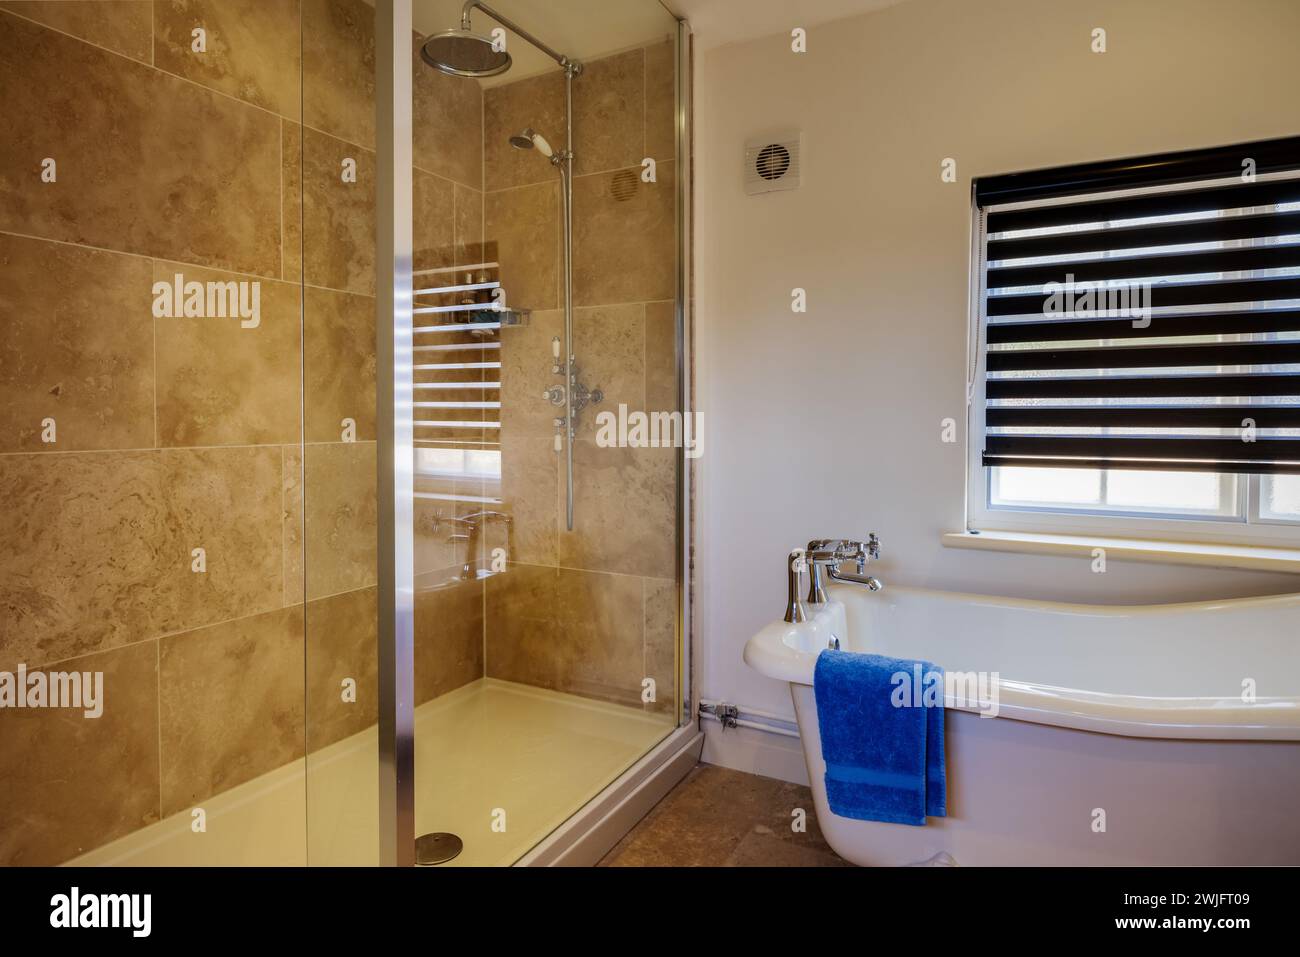 Dalham, Suffolk, England - Feb 19 2016: Compact cottage bathroom with shower and roll top bath Stock Photo